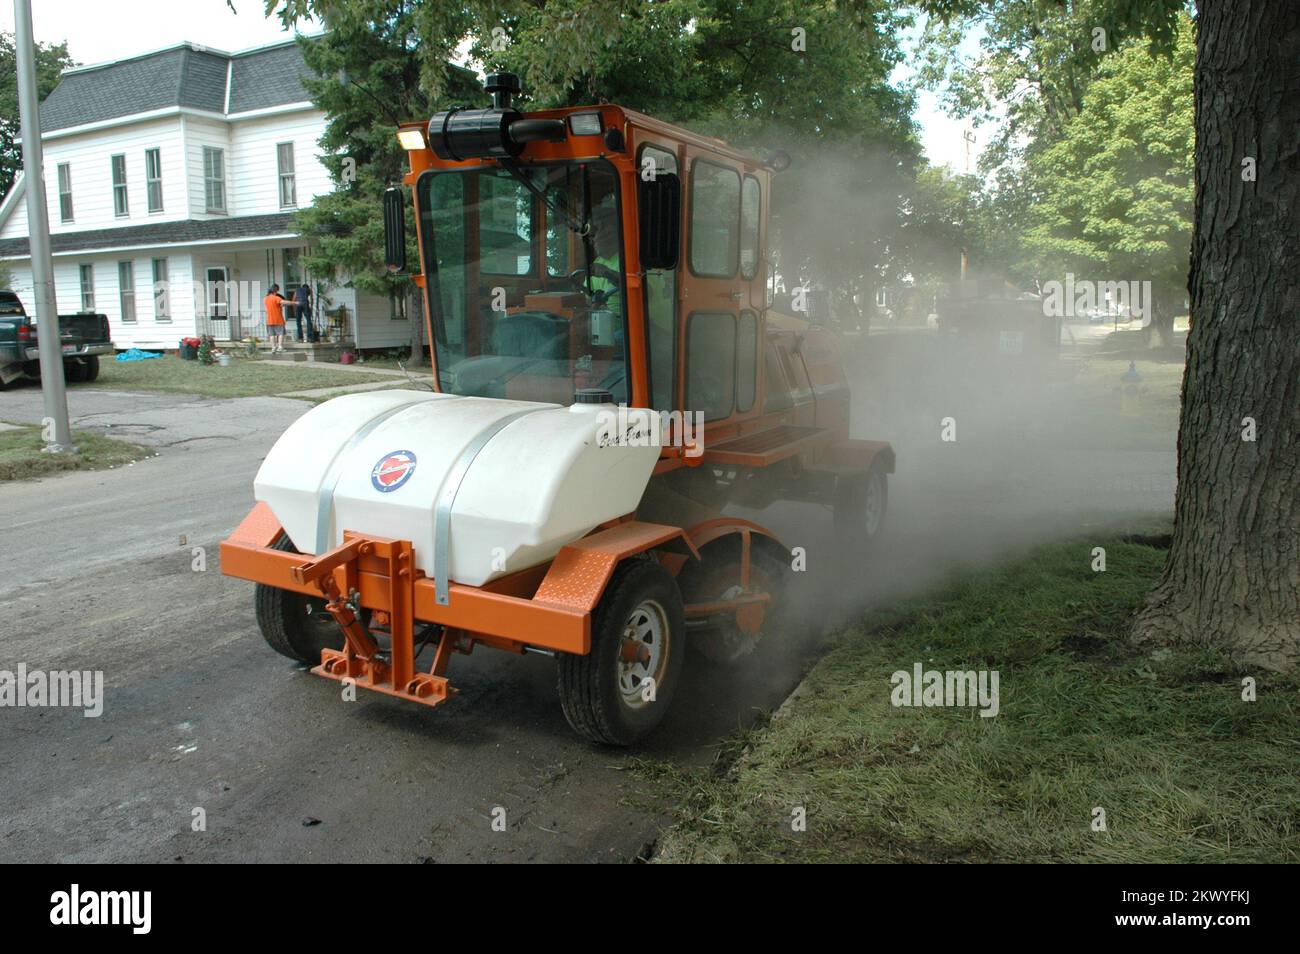 Severe Storms, Flooding, and Tornadoes,  Ottawa, Ohio, August 27, 2007   A Ohio Dept. of Transportation street cleaner follows along after the pick up of debris caused by flooding of the Blanchard River. The recent floods affected several North Central Ohio towns. Mark Wolfe/FEMA.. Photographs Relating to Disasters and Emergency Management Programs, Activities, and Officials Stock Photo